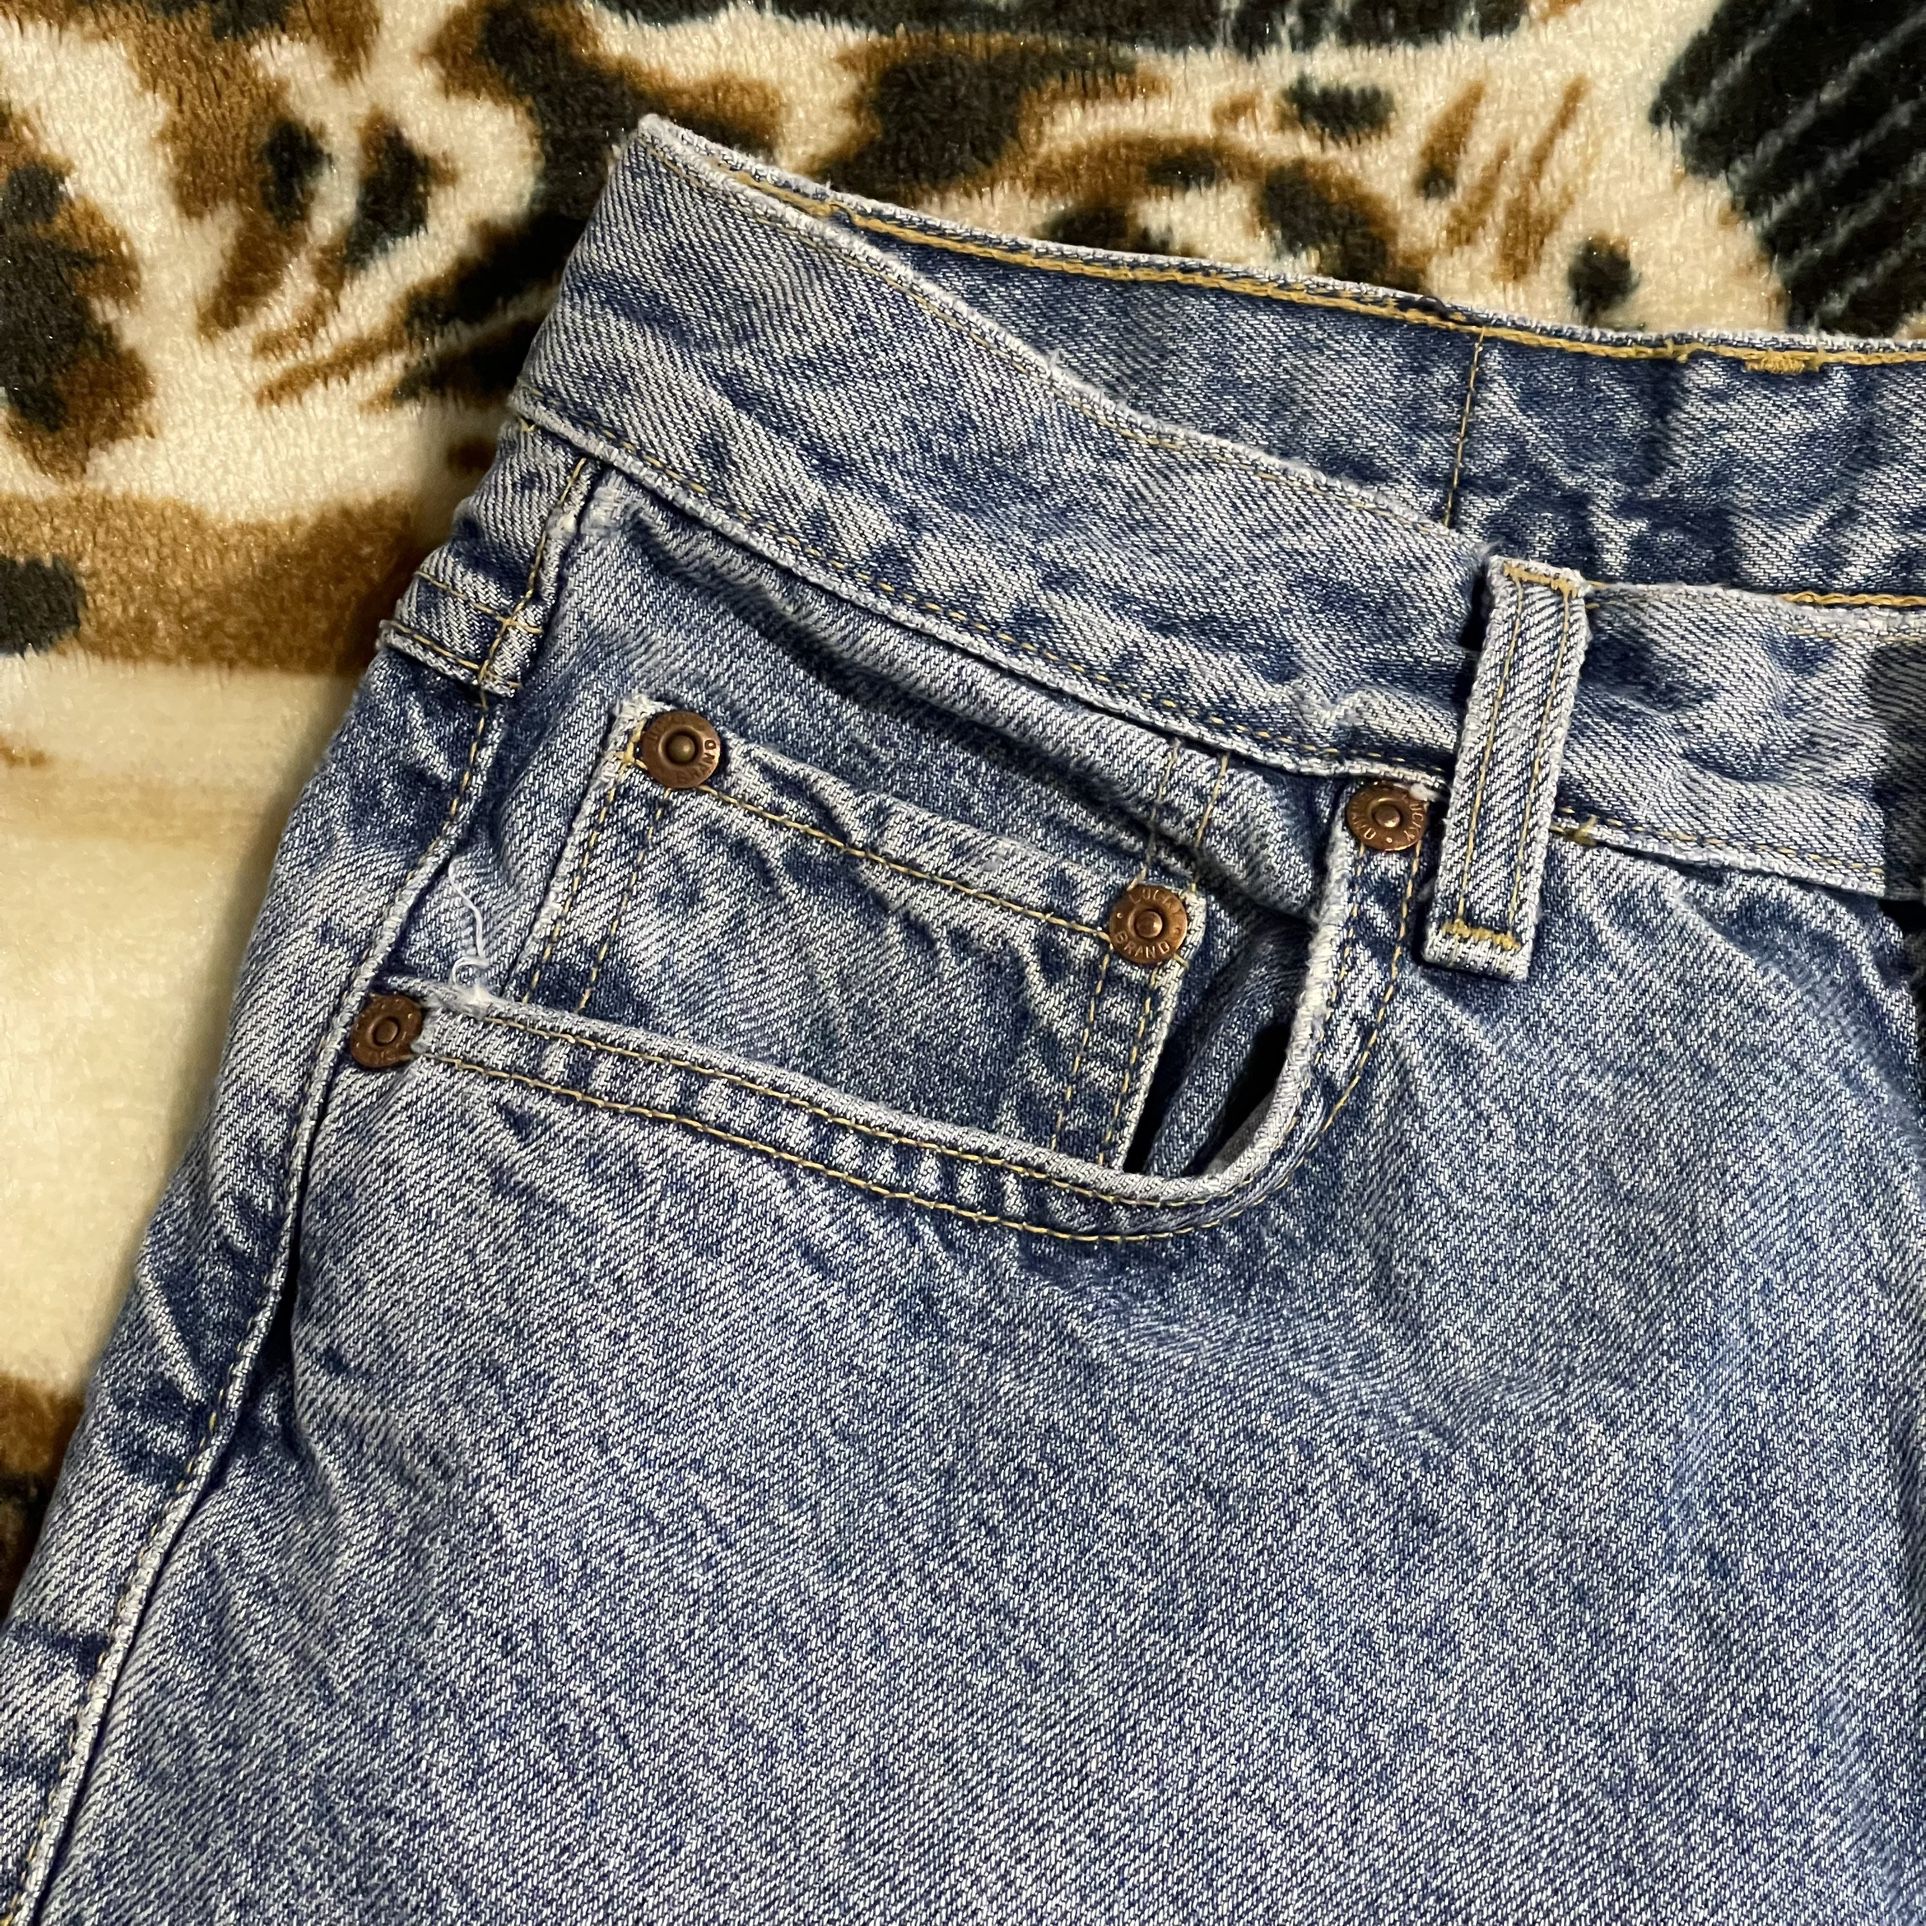 RARE Vintage Lucky Brand Jeans/Dungarees for Sale in Brooklyn, NY - OfferUp